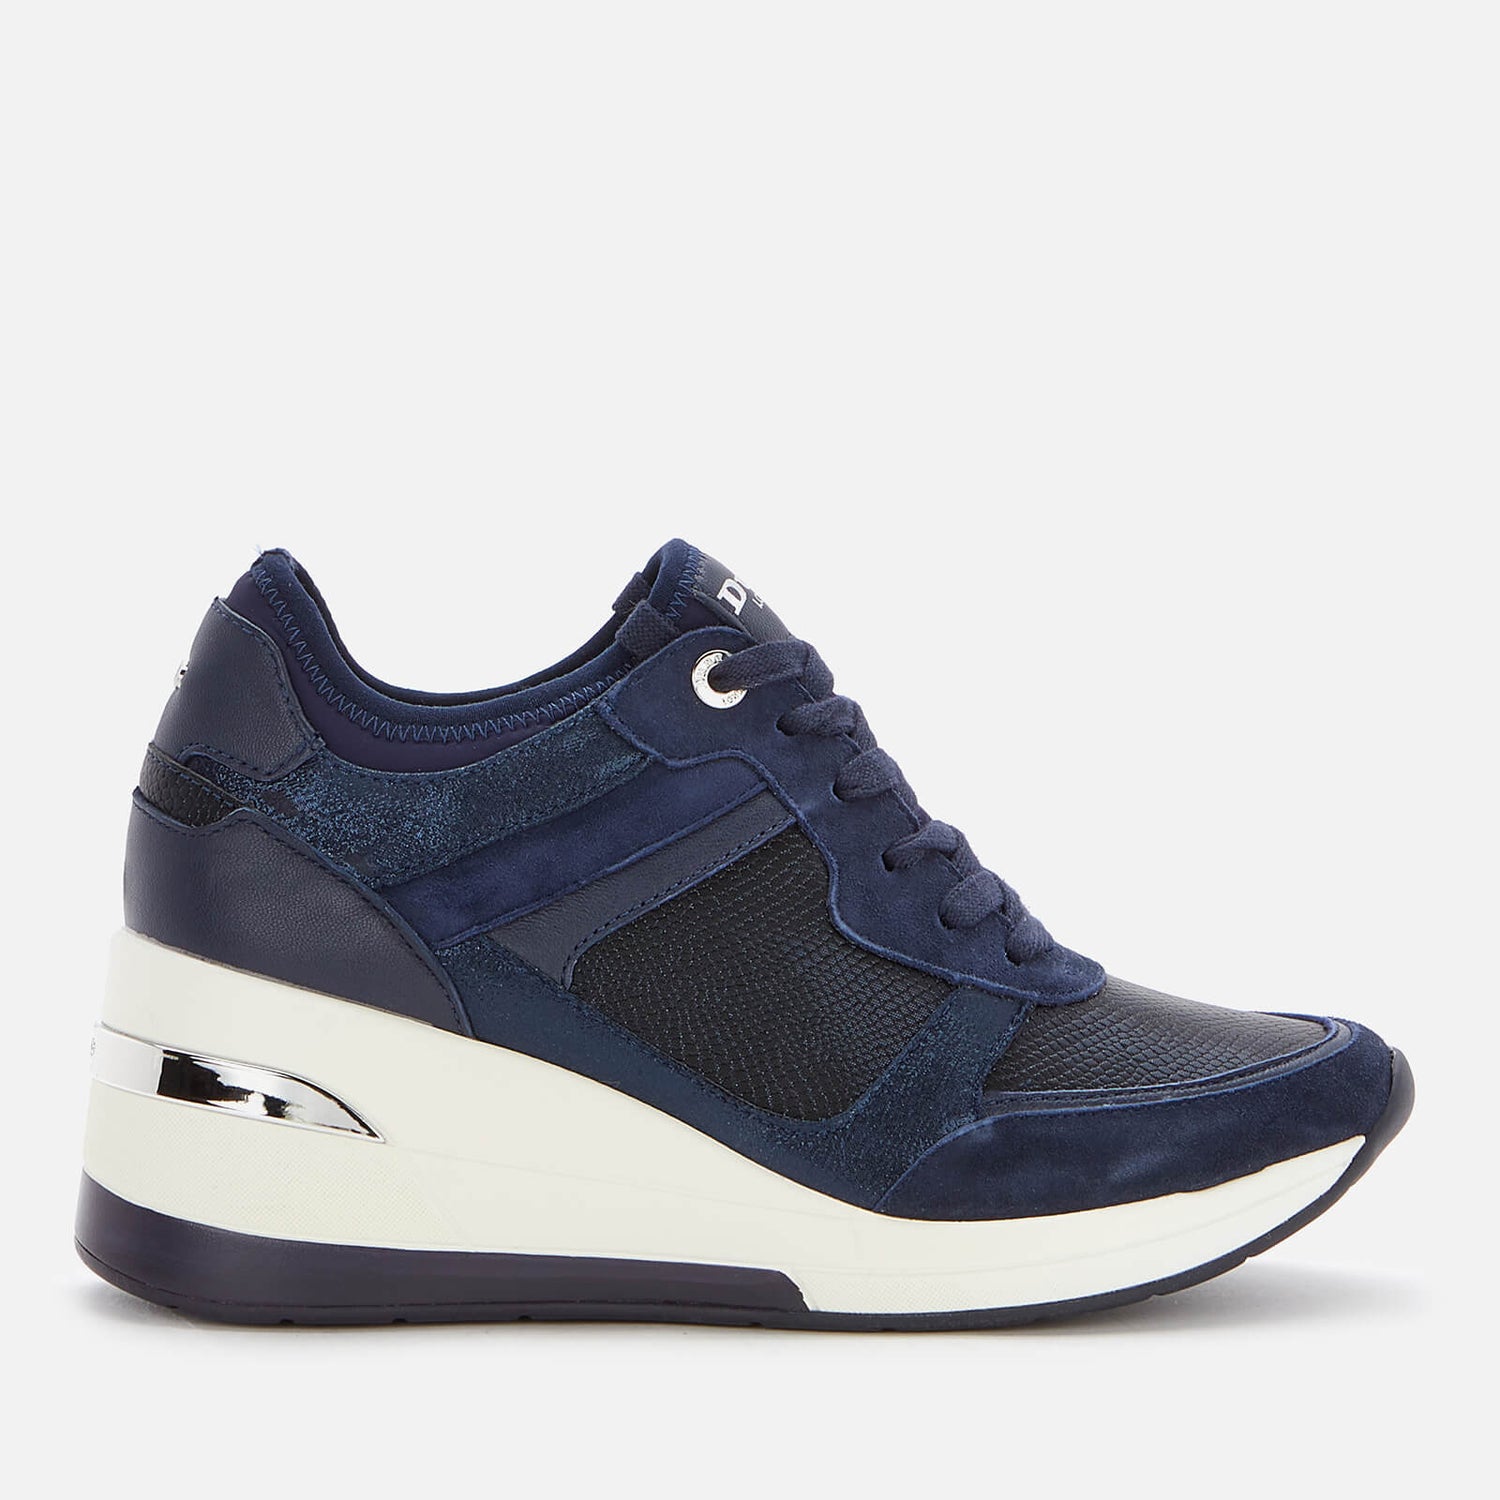 Dune Women's Eilas Running Style Trainers - Navy/Leather